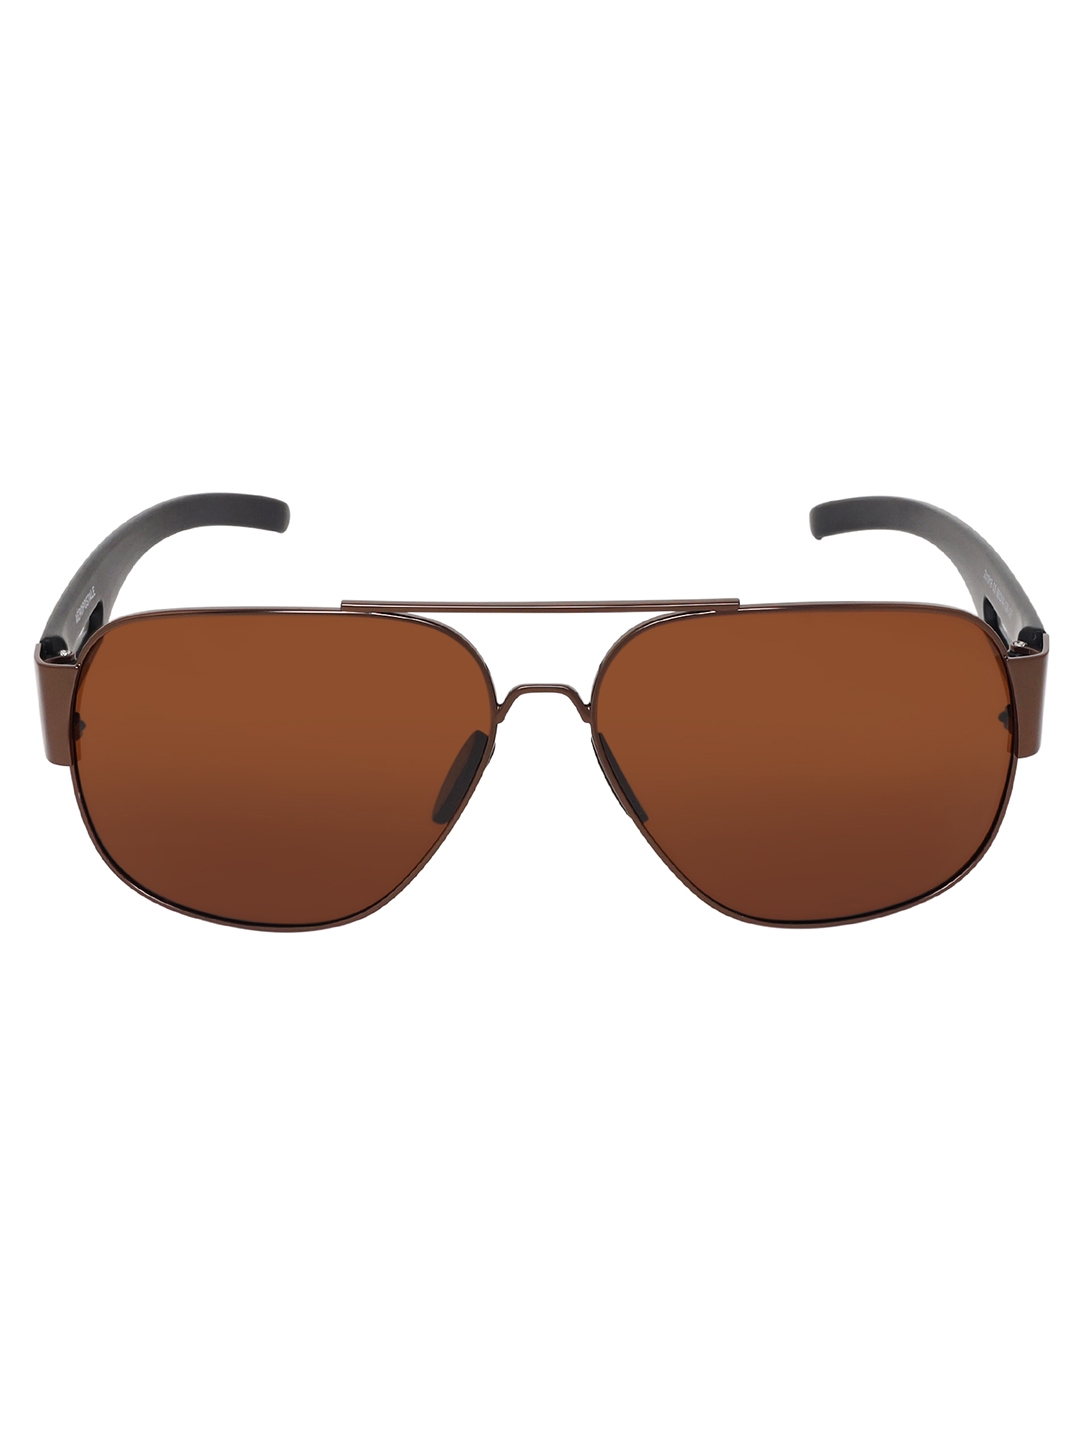 Aeropostale | Aeropostale AERO_SUN_201919_C2 Summer Sunglasses for Men comes with UV protection Polarized Anti Glare lens Mens trending Summer Style Full Brown Shaded Lens with Black Acrylic Frame.